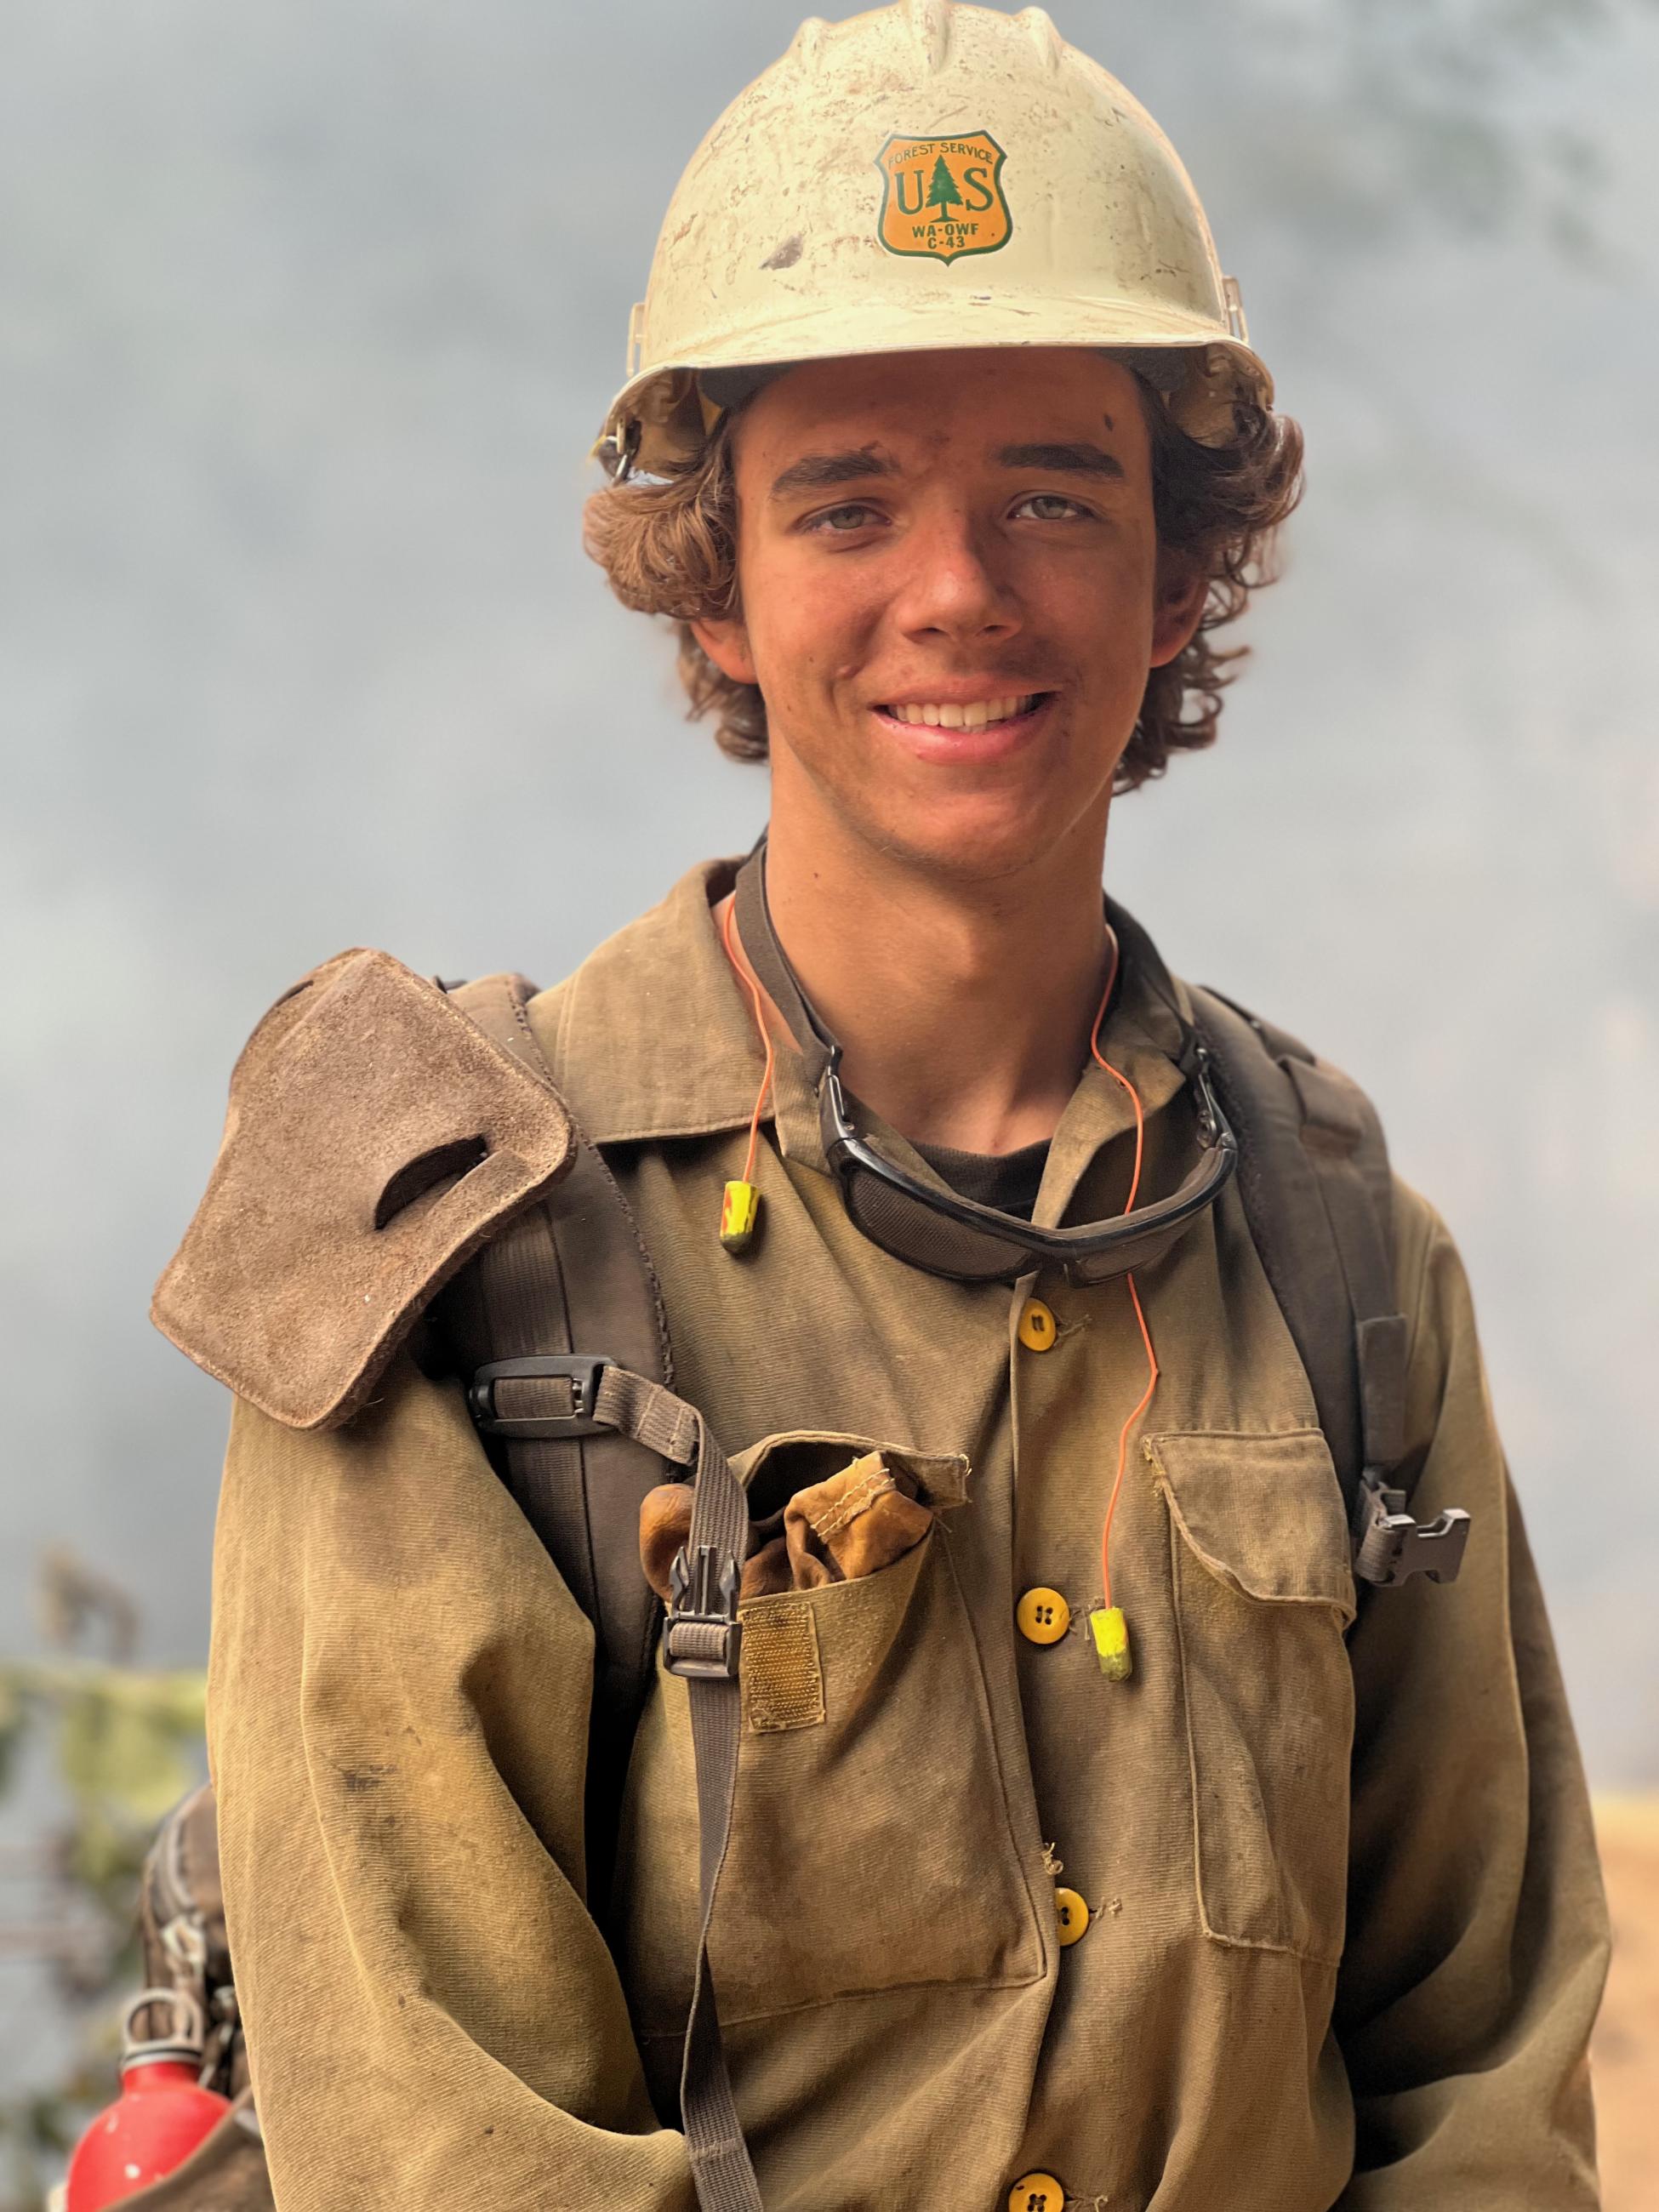 A portrait of a firefighter in protective gear, including a helmet and yellow fire shirt